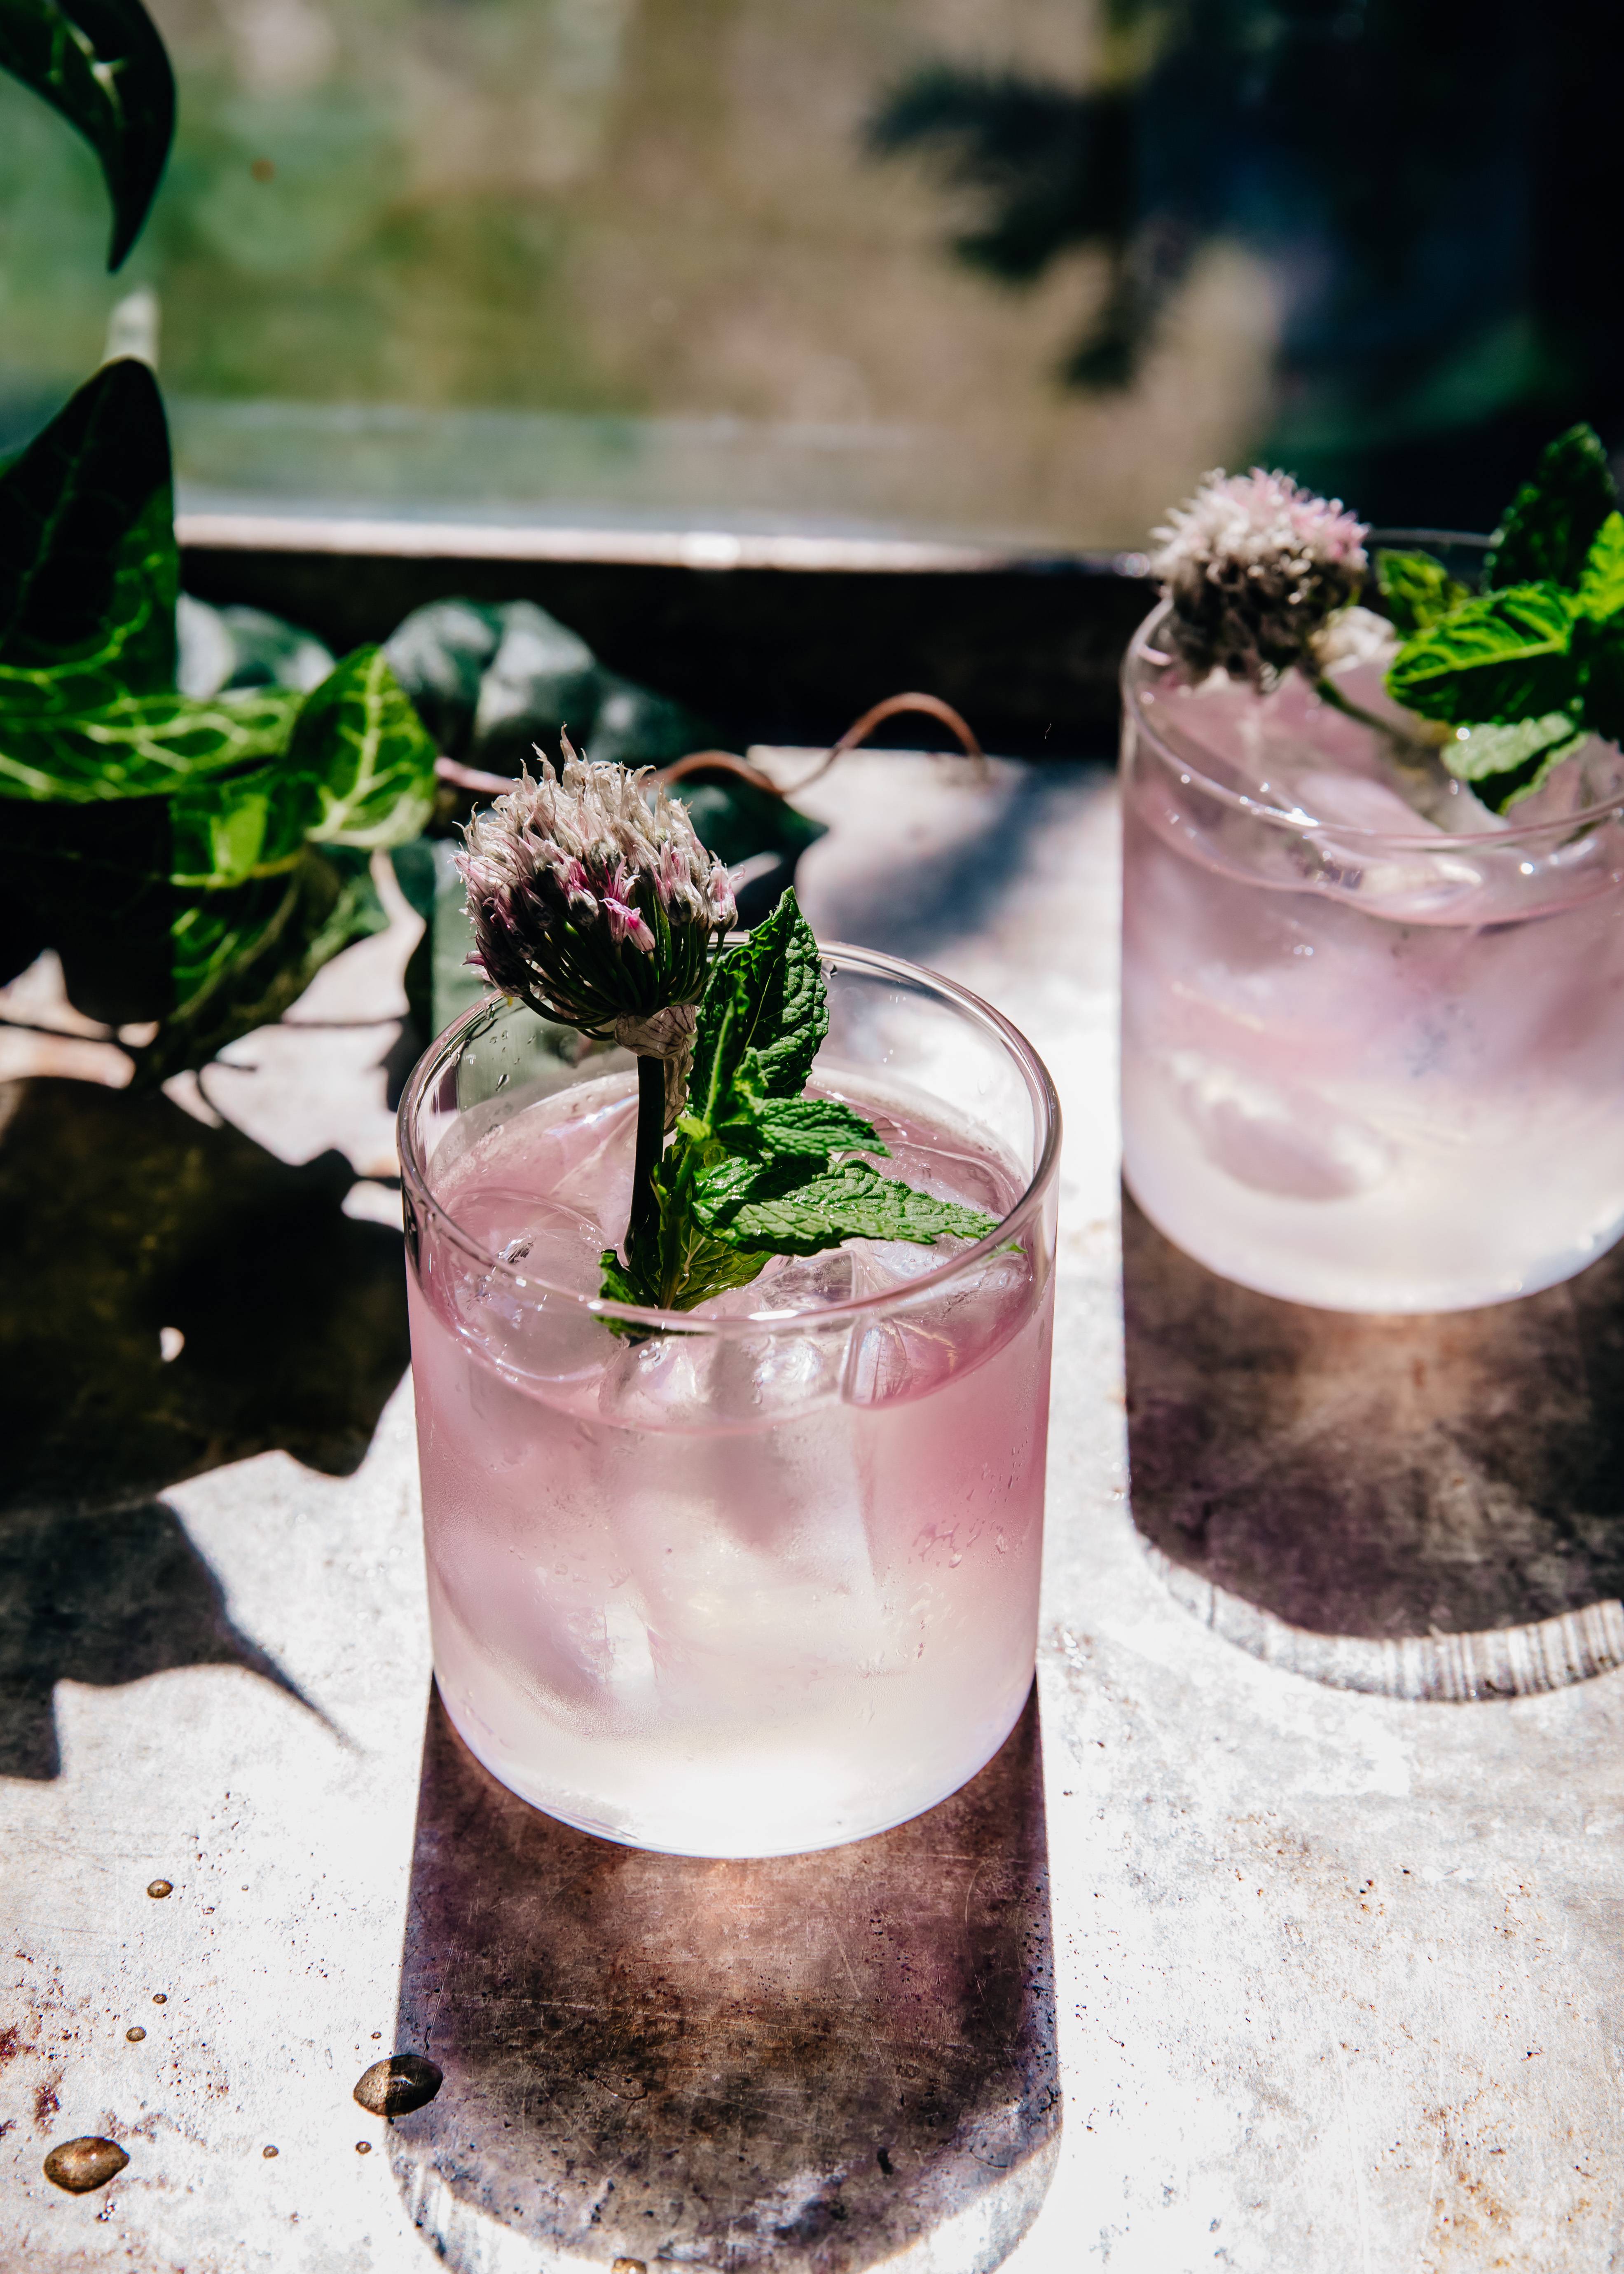 Chive Blossom Shrub Cocktails | Well and Full | #spring #cocktail #recipe